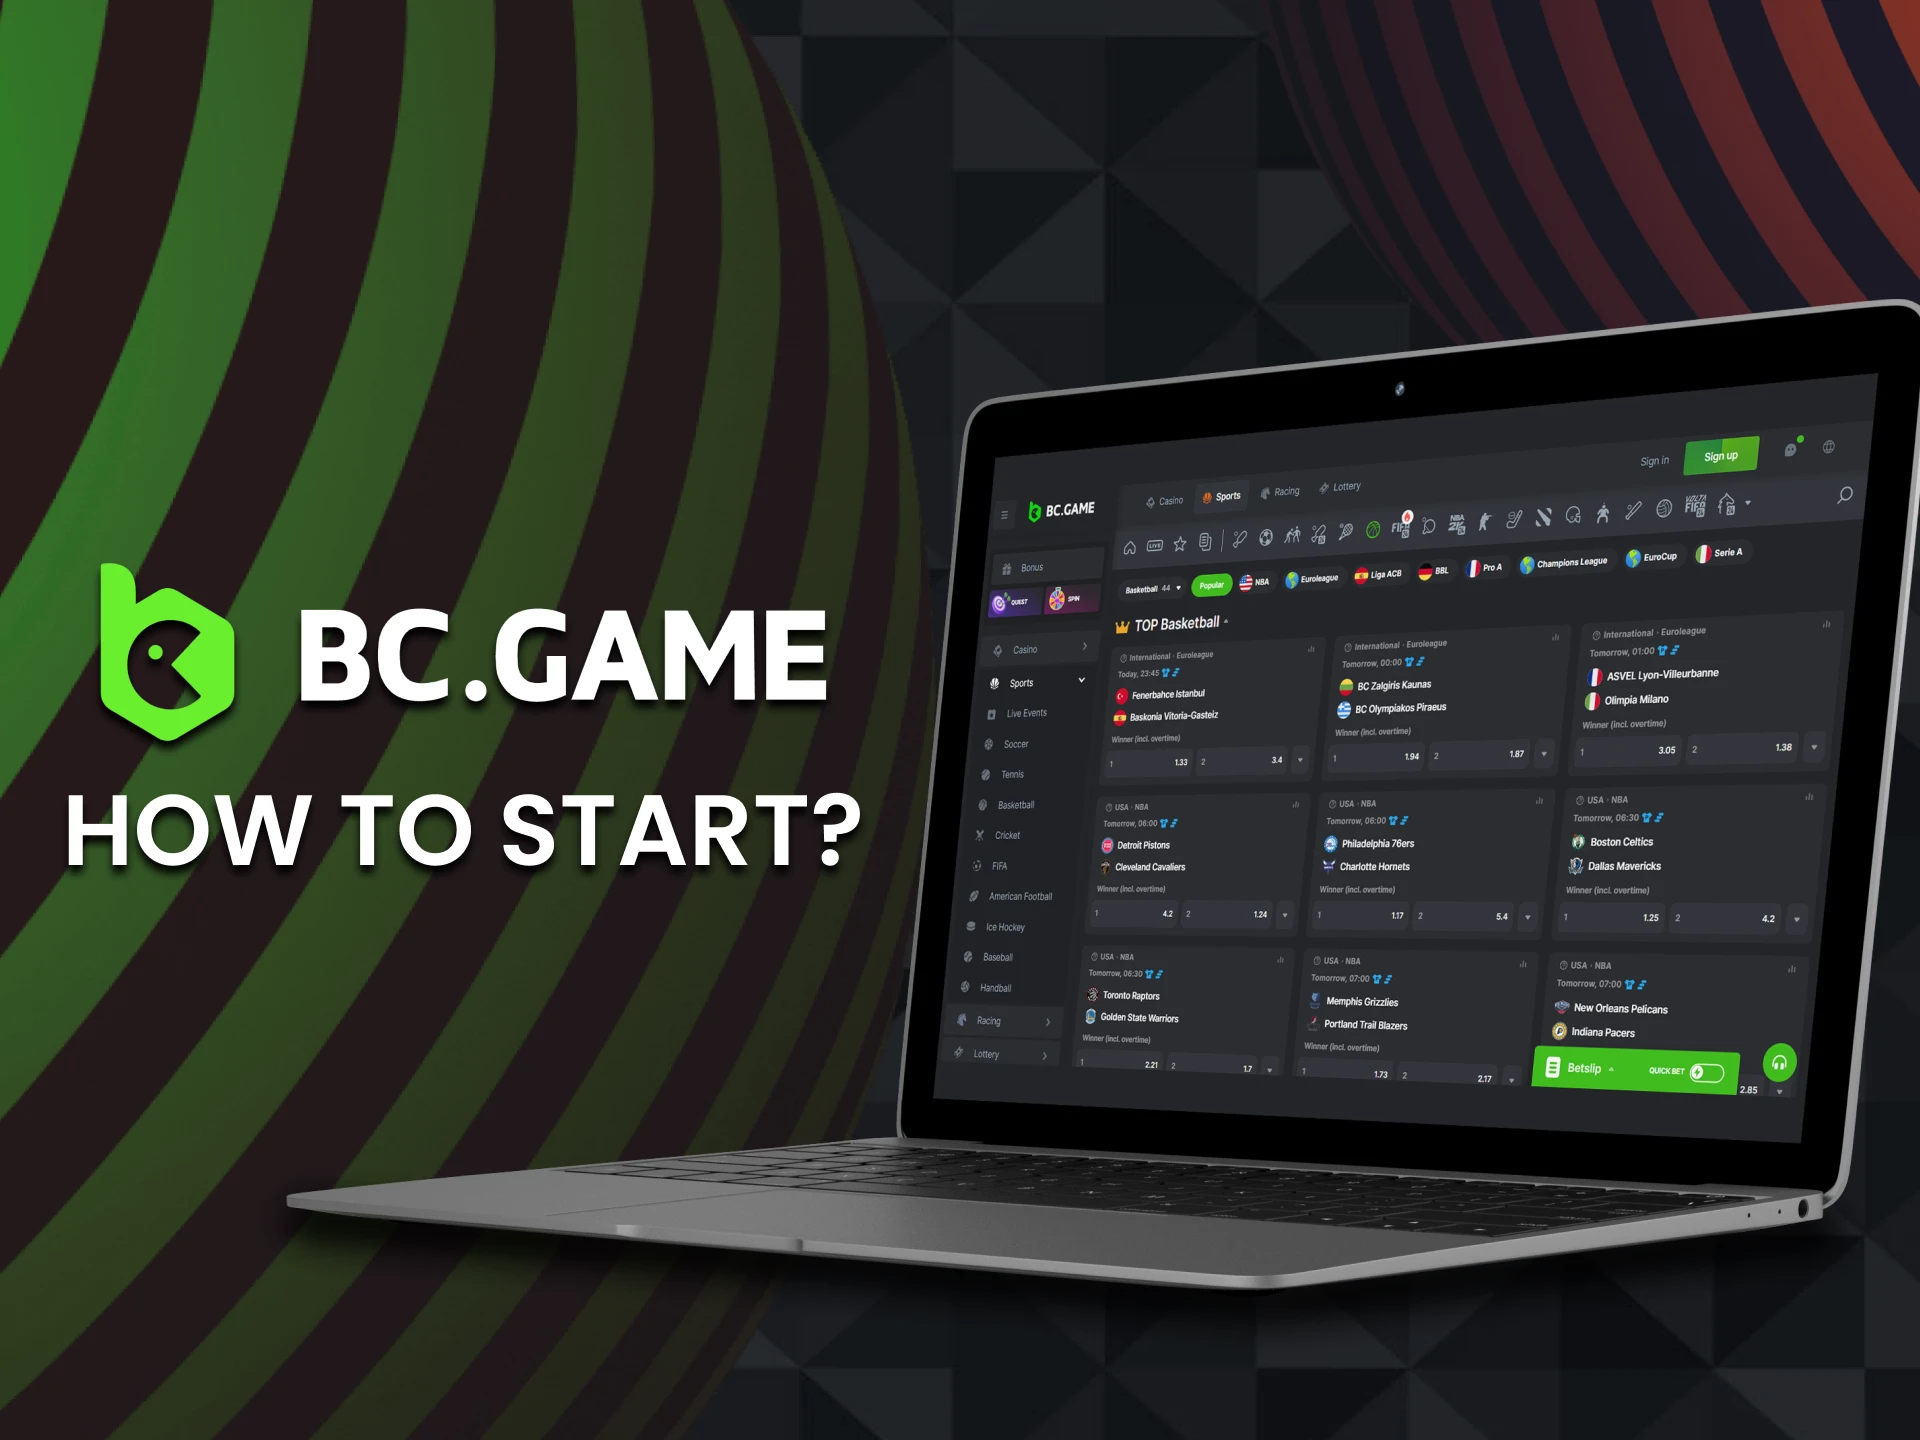 Select basketball from the BC Game Sports section and start betting.